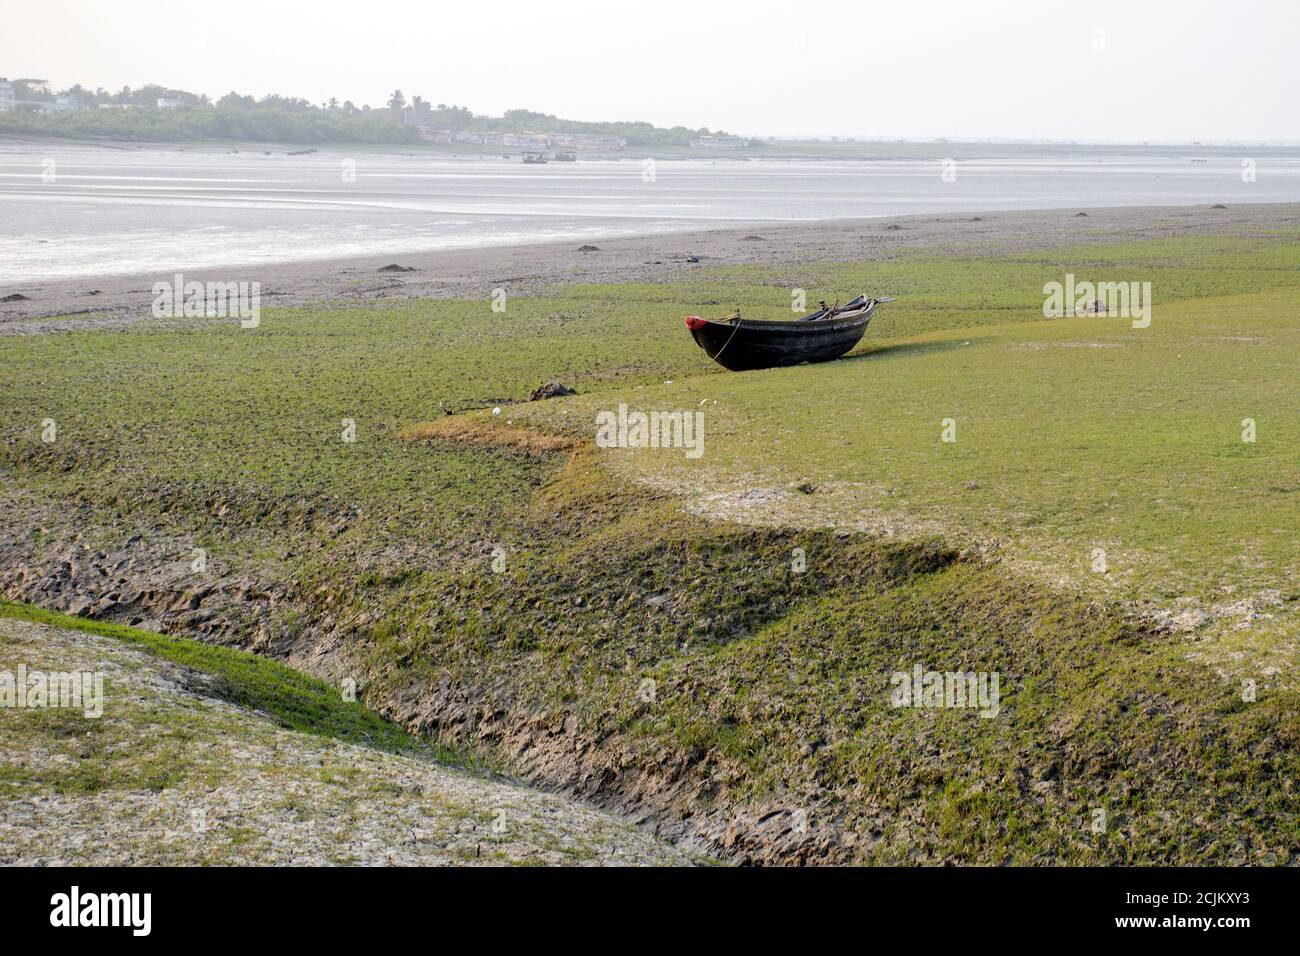 lonely boat at matla river bank canning west bengal india Stock Photo